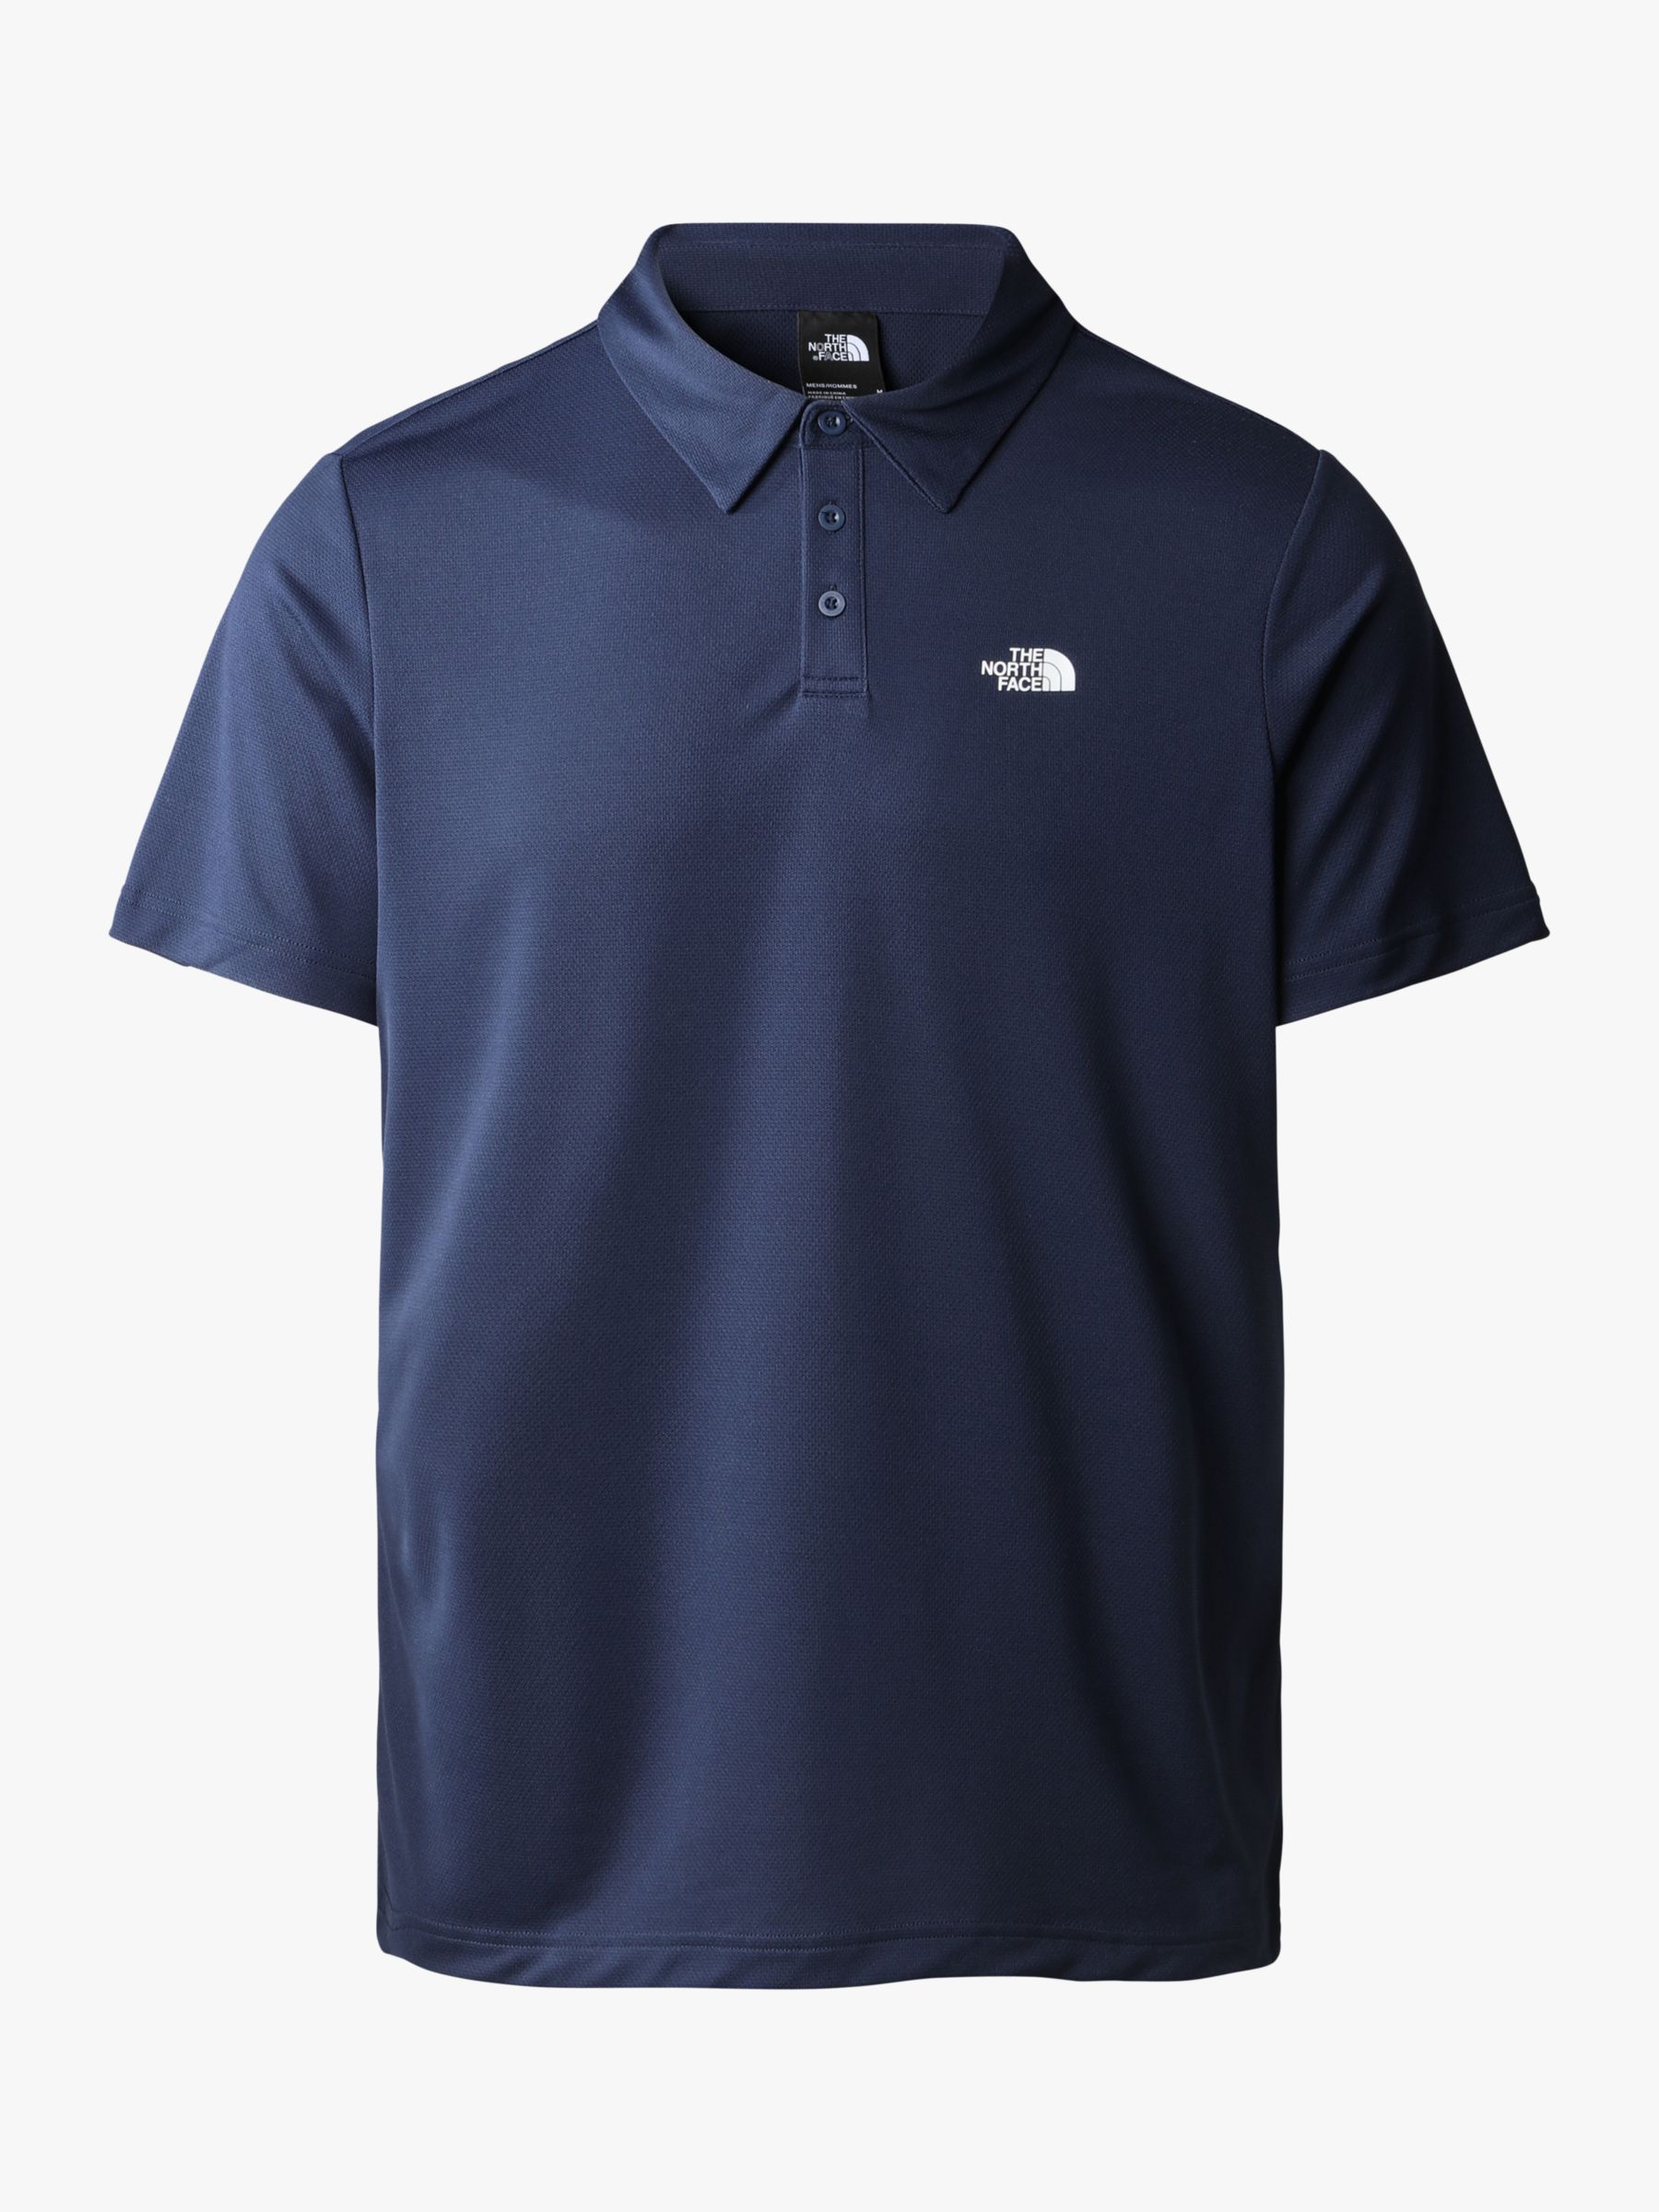 Buy The North Face Tanken Polo Shirt Online at johnlewis.com